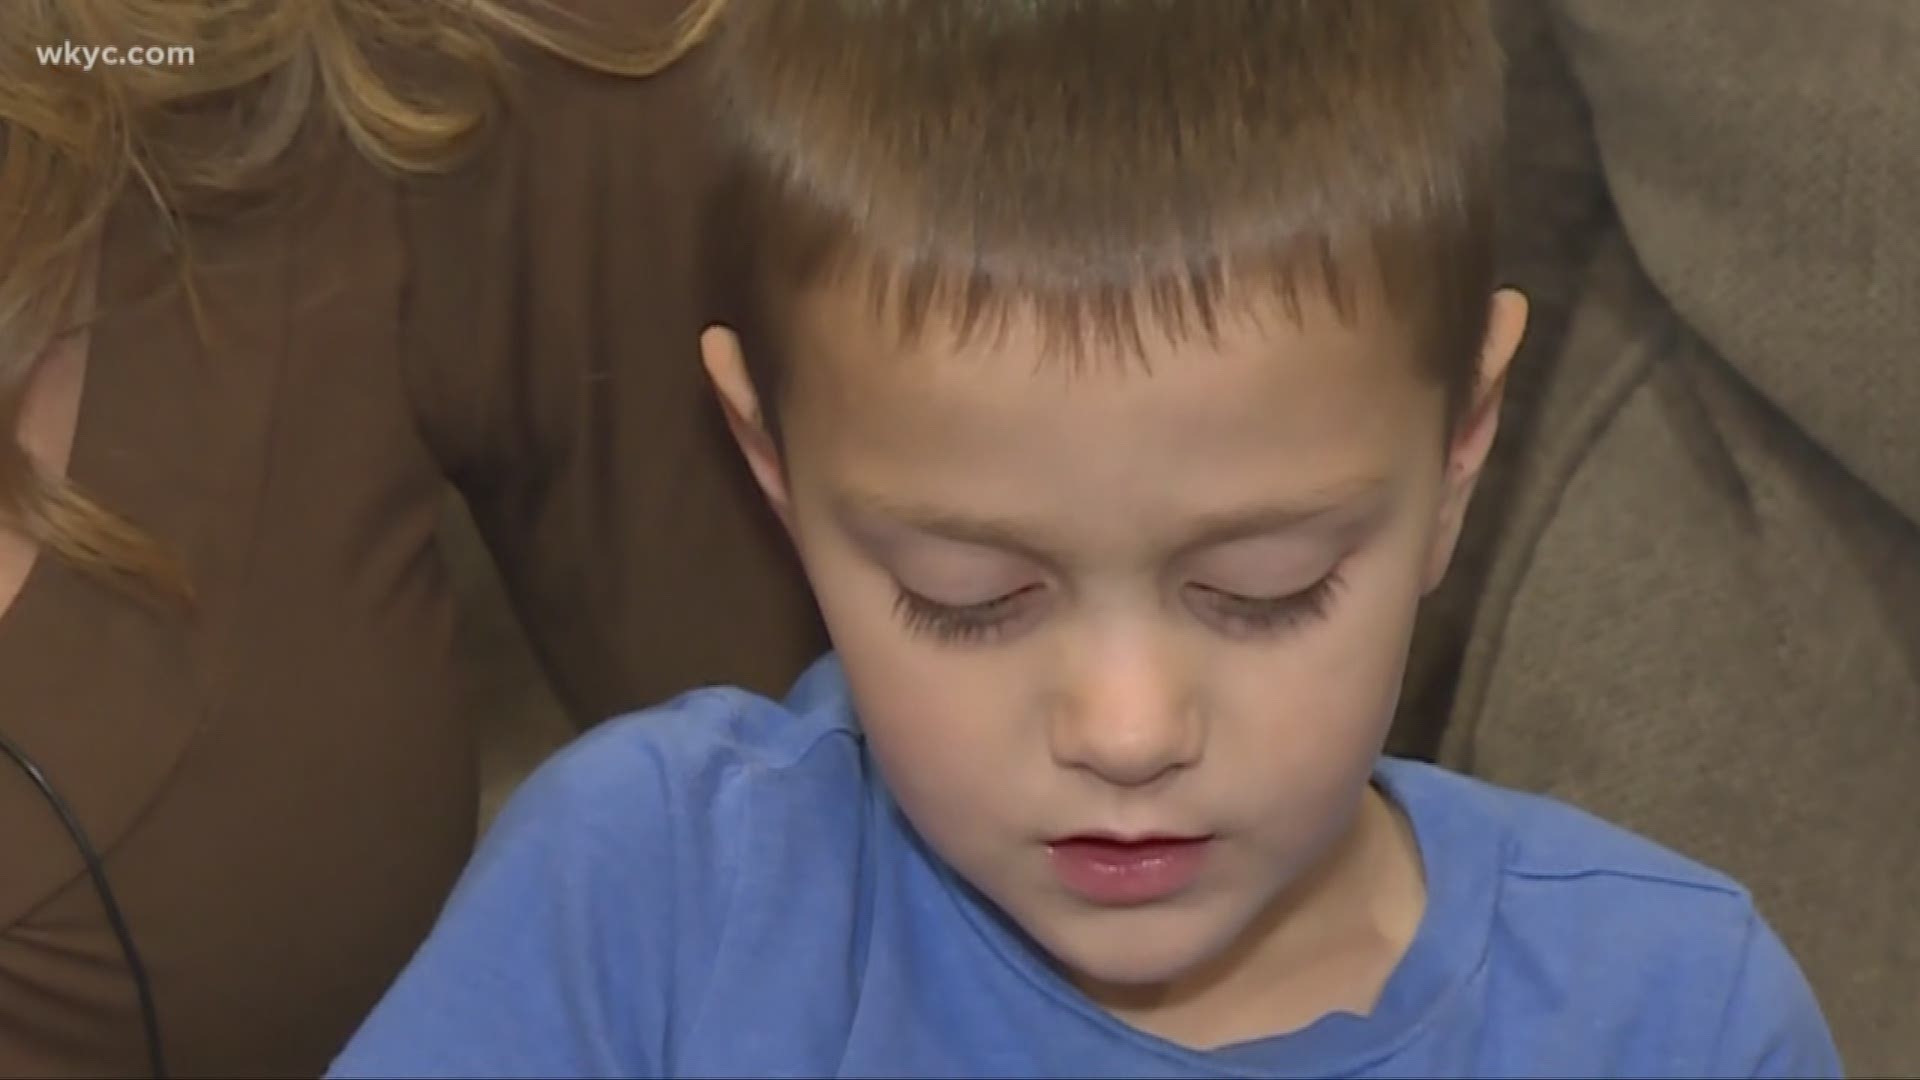 A mom credits her 4-year-old son for helping alert others of a fire at a daycare facility in Green on Nov. 7, 2018. 

https://www.wkyc.com/article/news/local/northeast-ohio/fire-breaks-out-at-day-care-center-in-green/95-612404982

According to the facilit